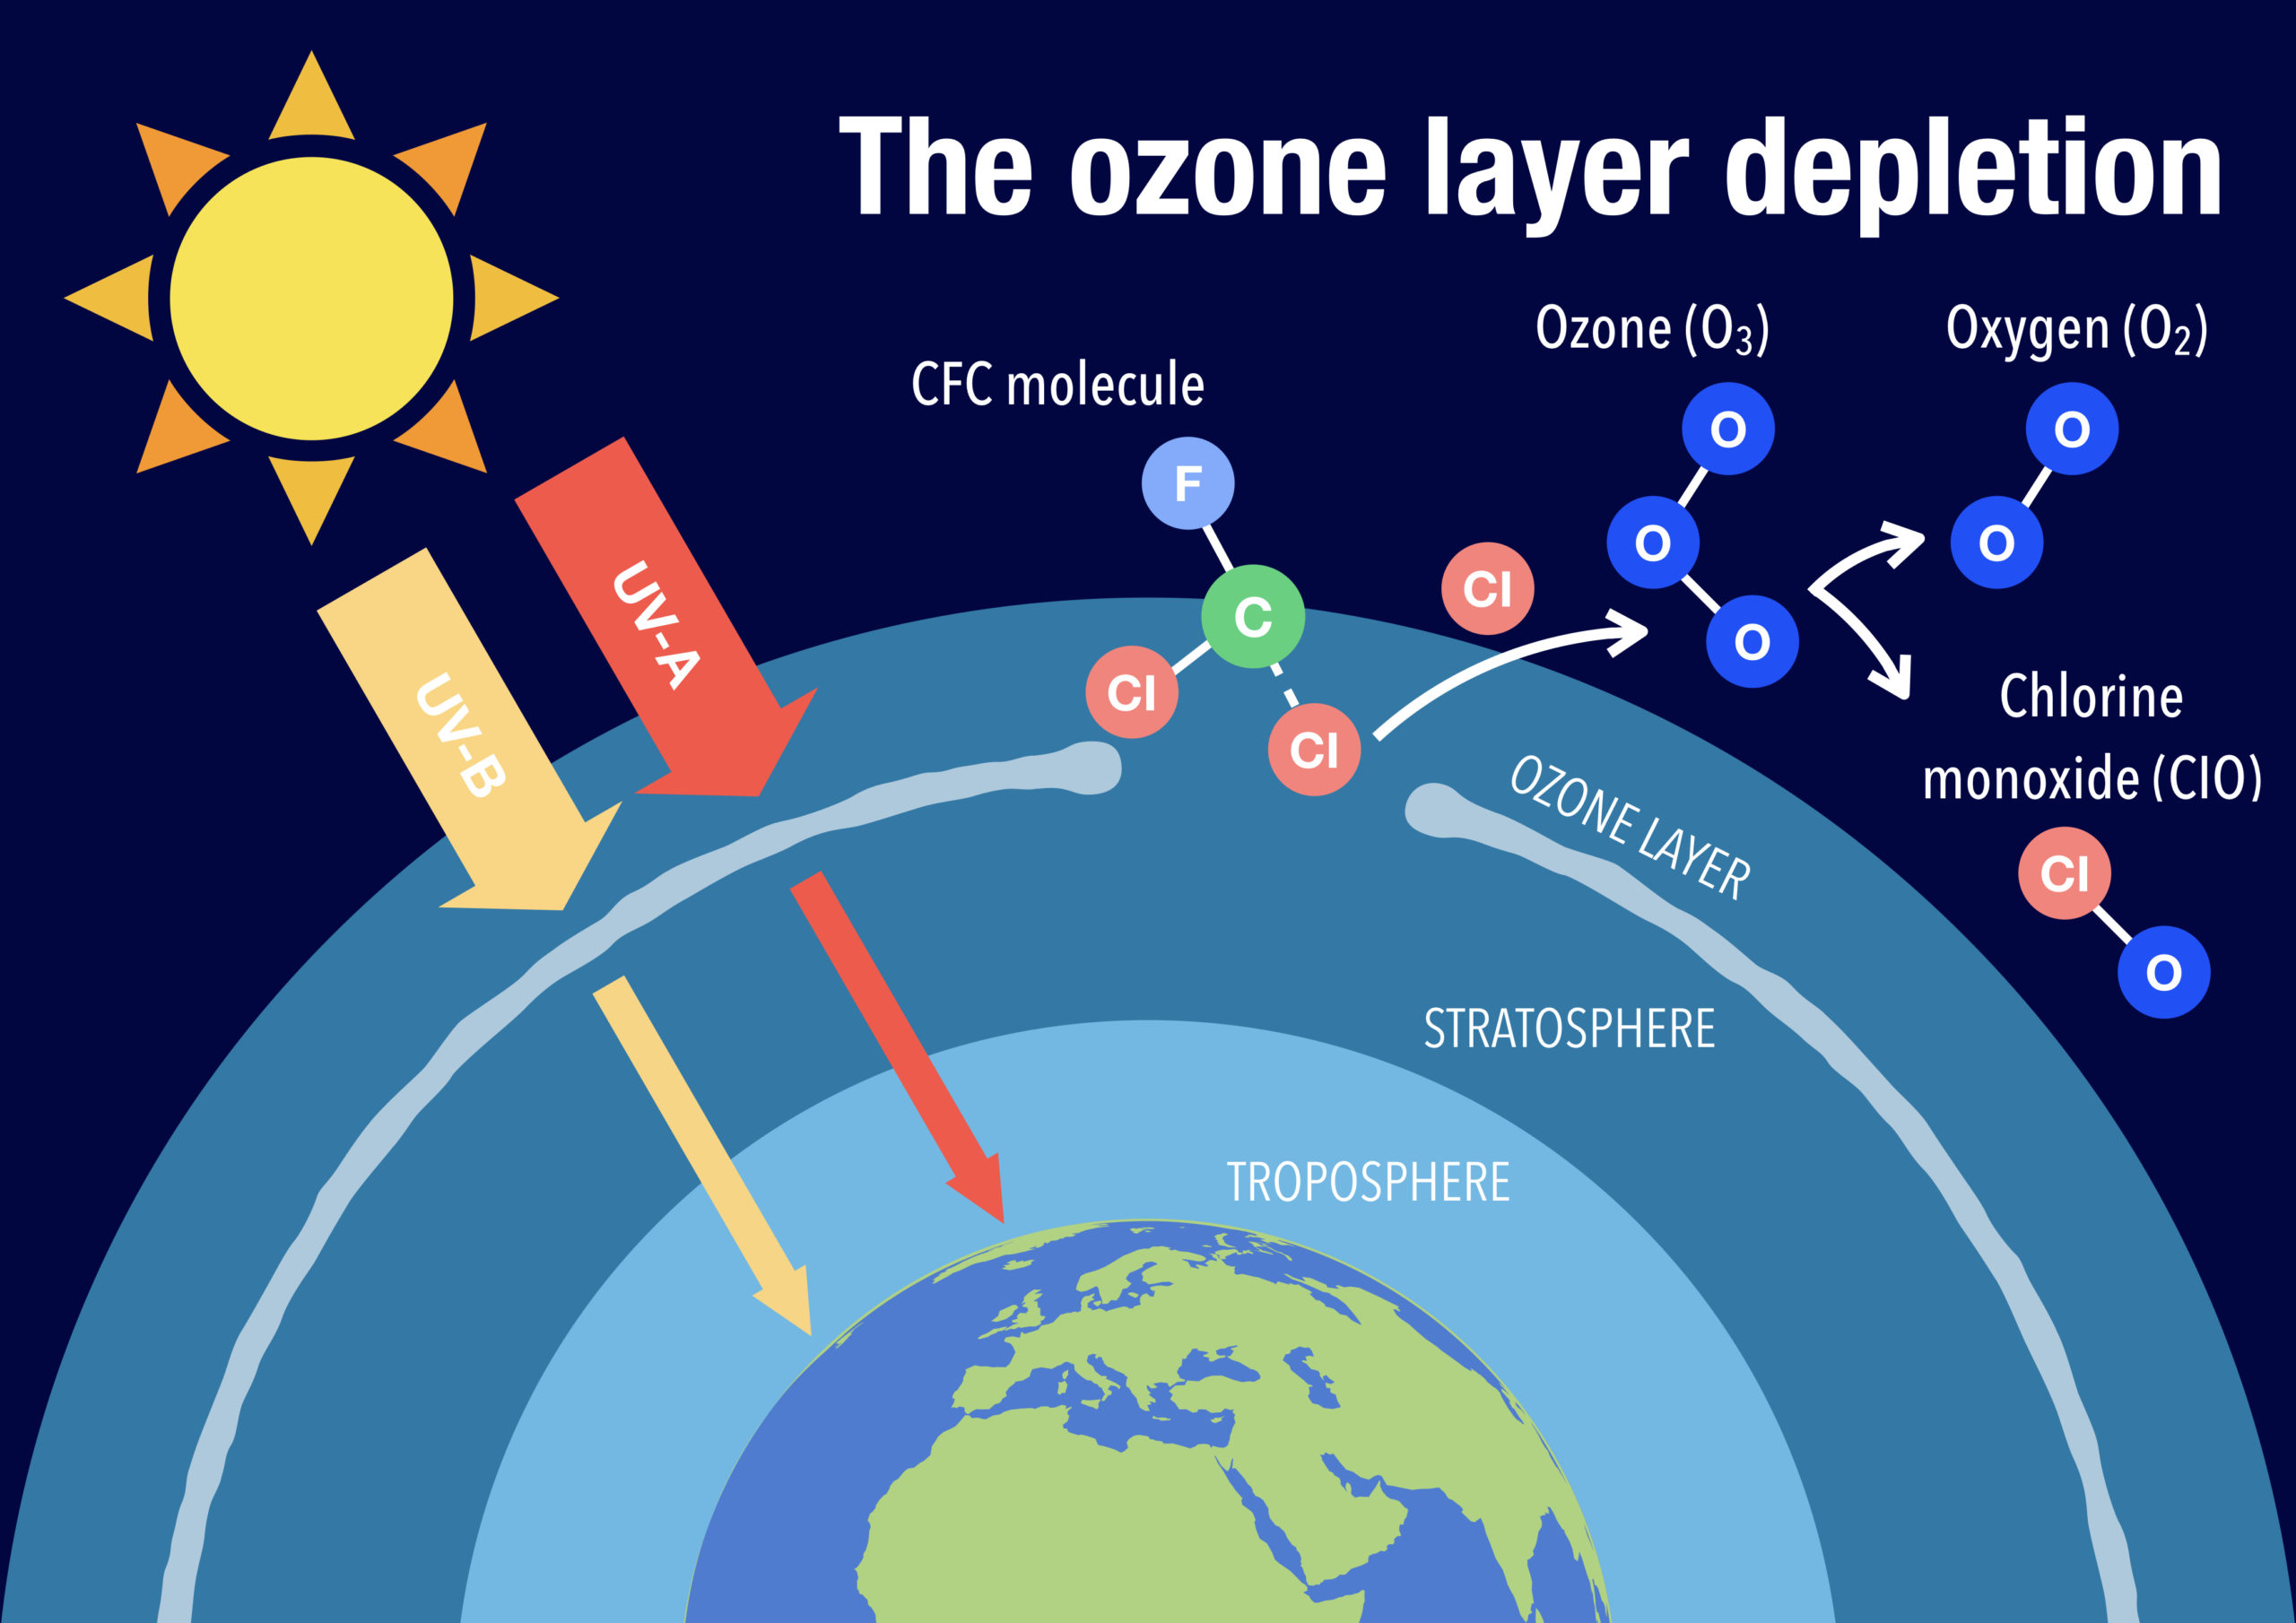 15-extraordinary-facts-about-ozone-layer-depletion